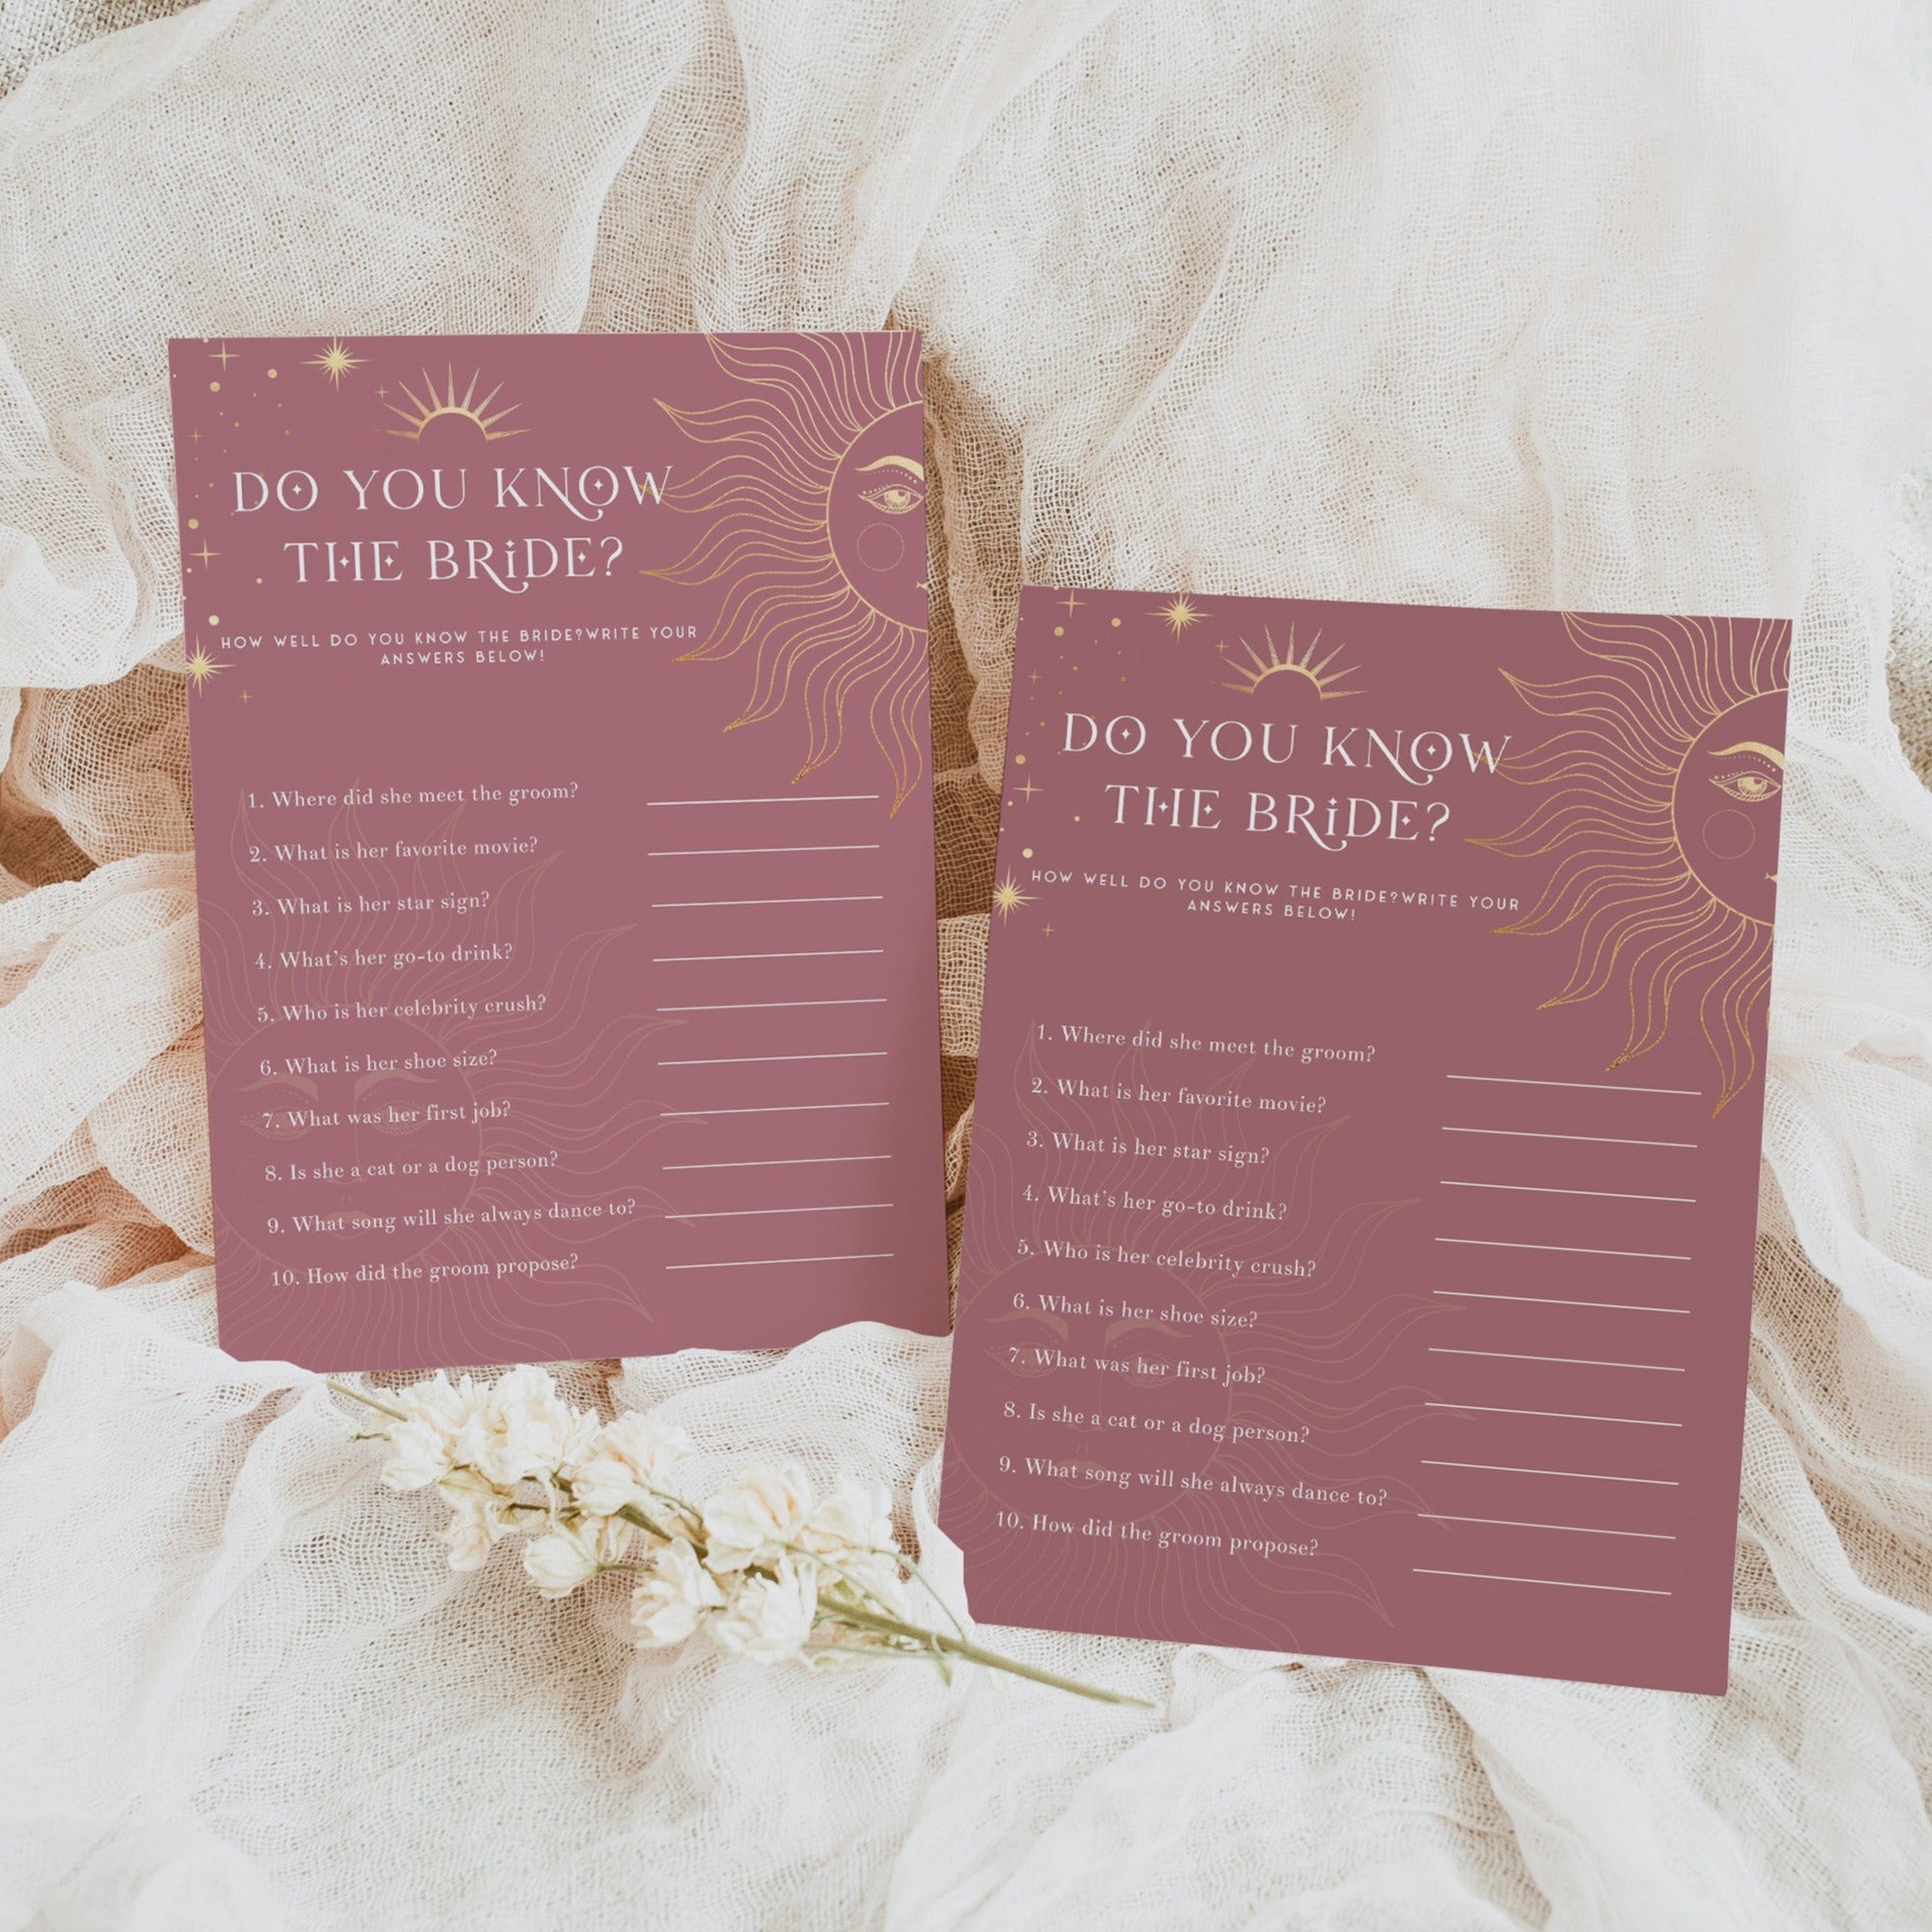 Fully editable and printable bridal shower do you know the bride game with a celestial design. Perfect for a celestial bridal shower themed party